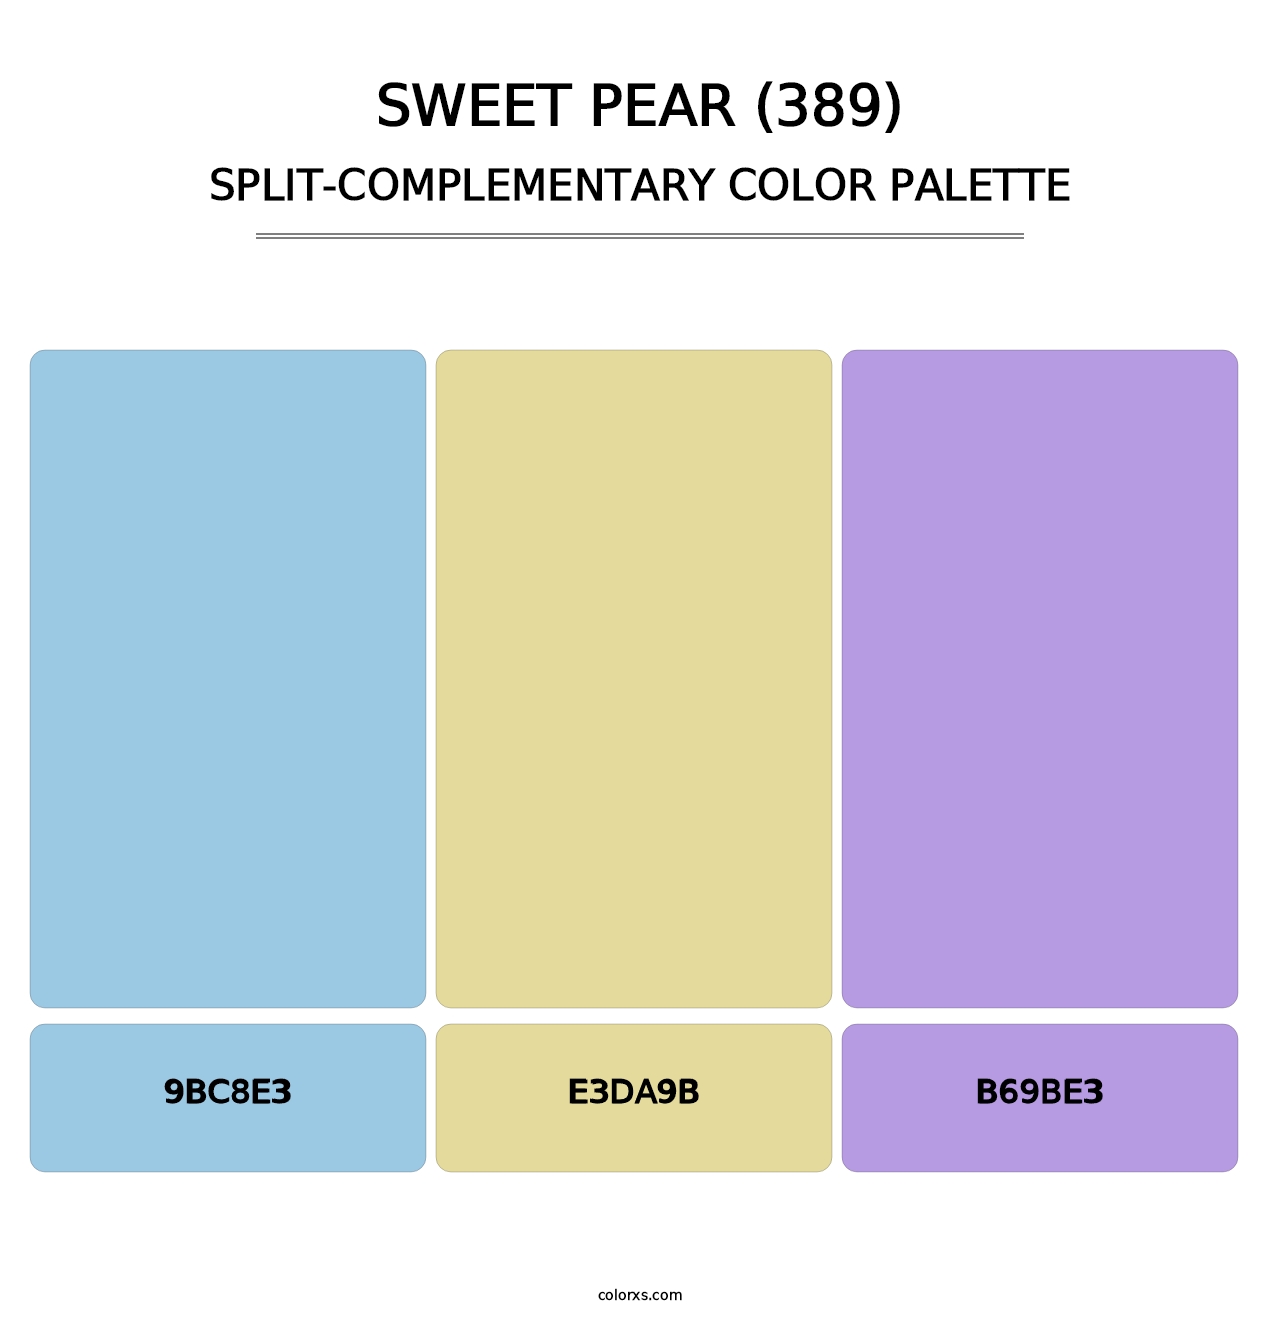 Sweet Pear (389) - Split-Complementary Color Palette